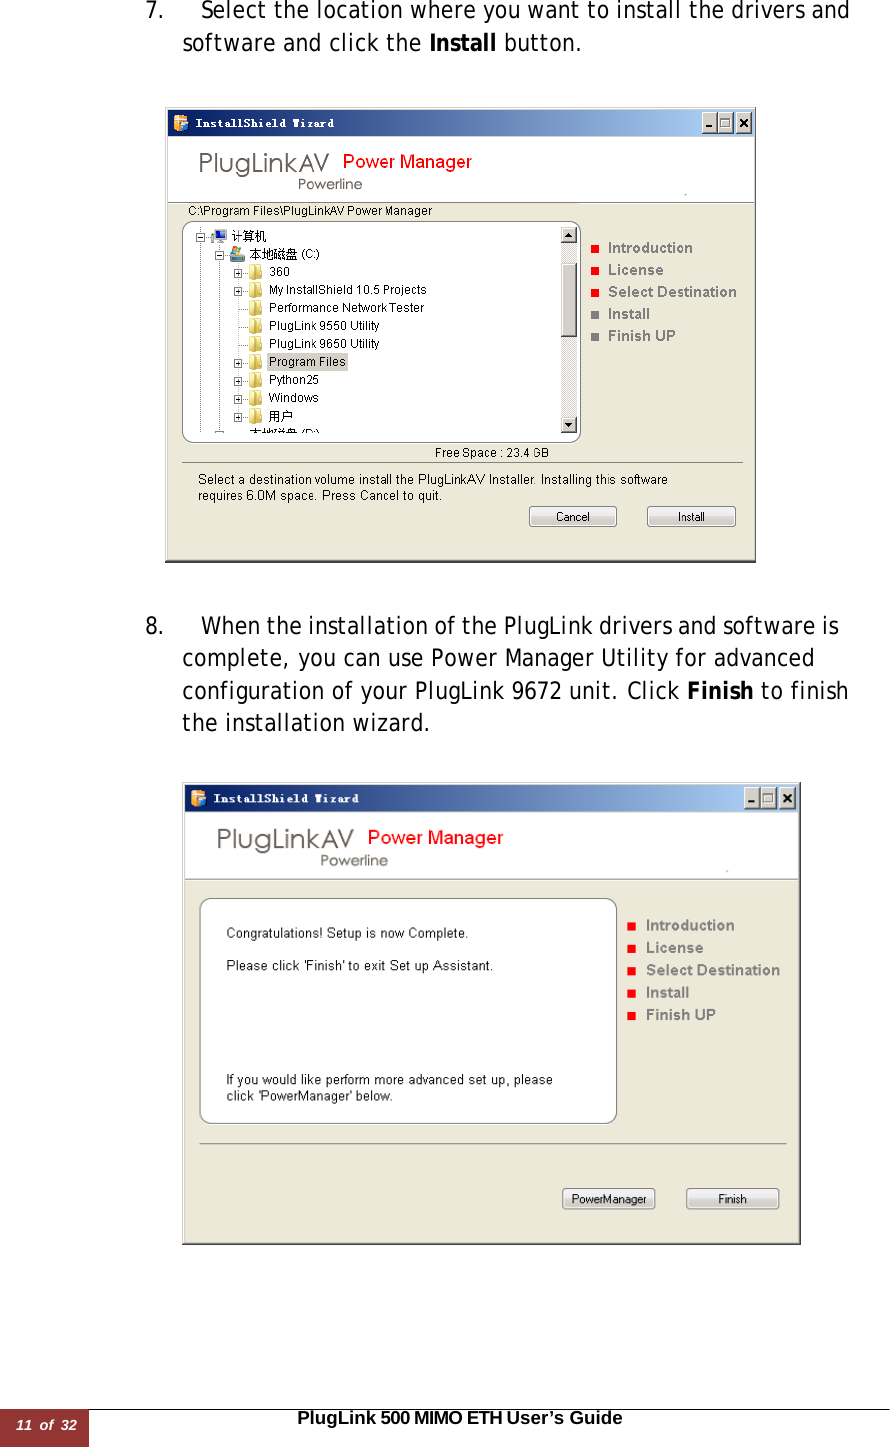 11 of 32                                                                                                                       PlugLink 500 MIMO ETH User’s Guide  7. Select the location where you want to install the drivers and software and click the Install button.          8. When the installation of the PlugLink drivers and software is complete, you can use Power Manager Utility for advanced configuration of your PlugLink 9672 unit. Click Finish to finish the installation wizard.    